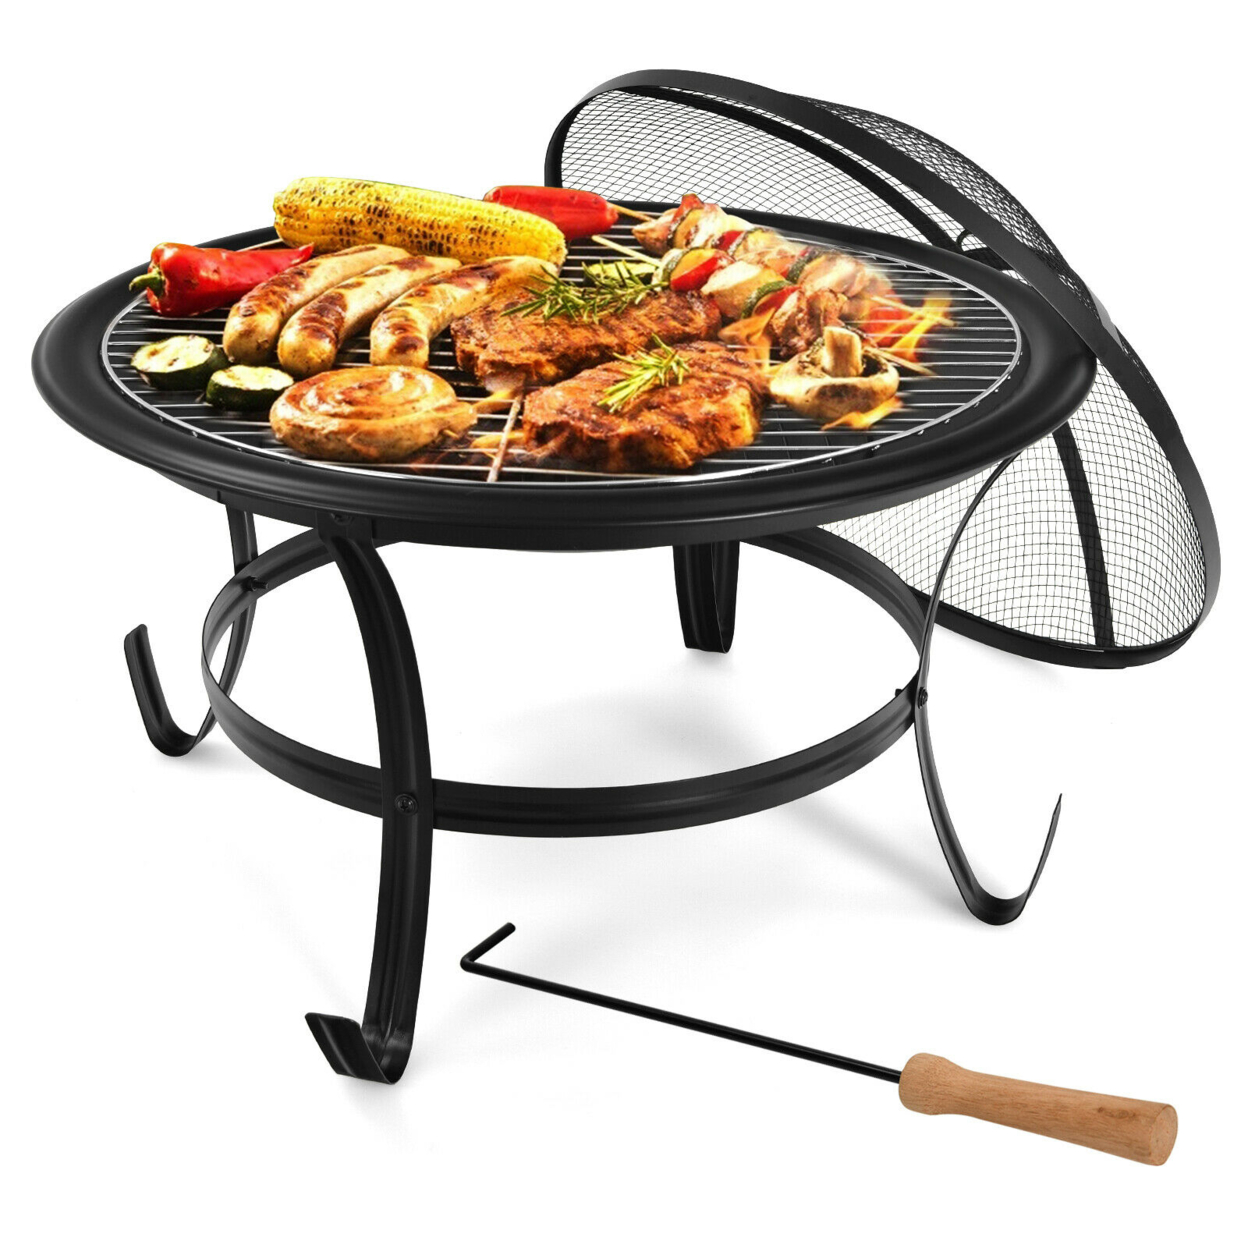 22'' Steel Outdoor Fire Pit Bowl BBQ Grill W/ Wood Grate Cooking Grate Poker